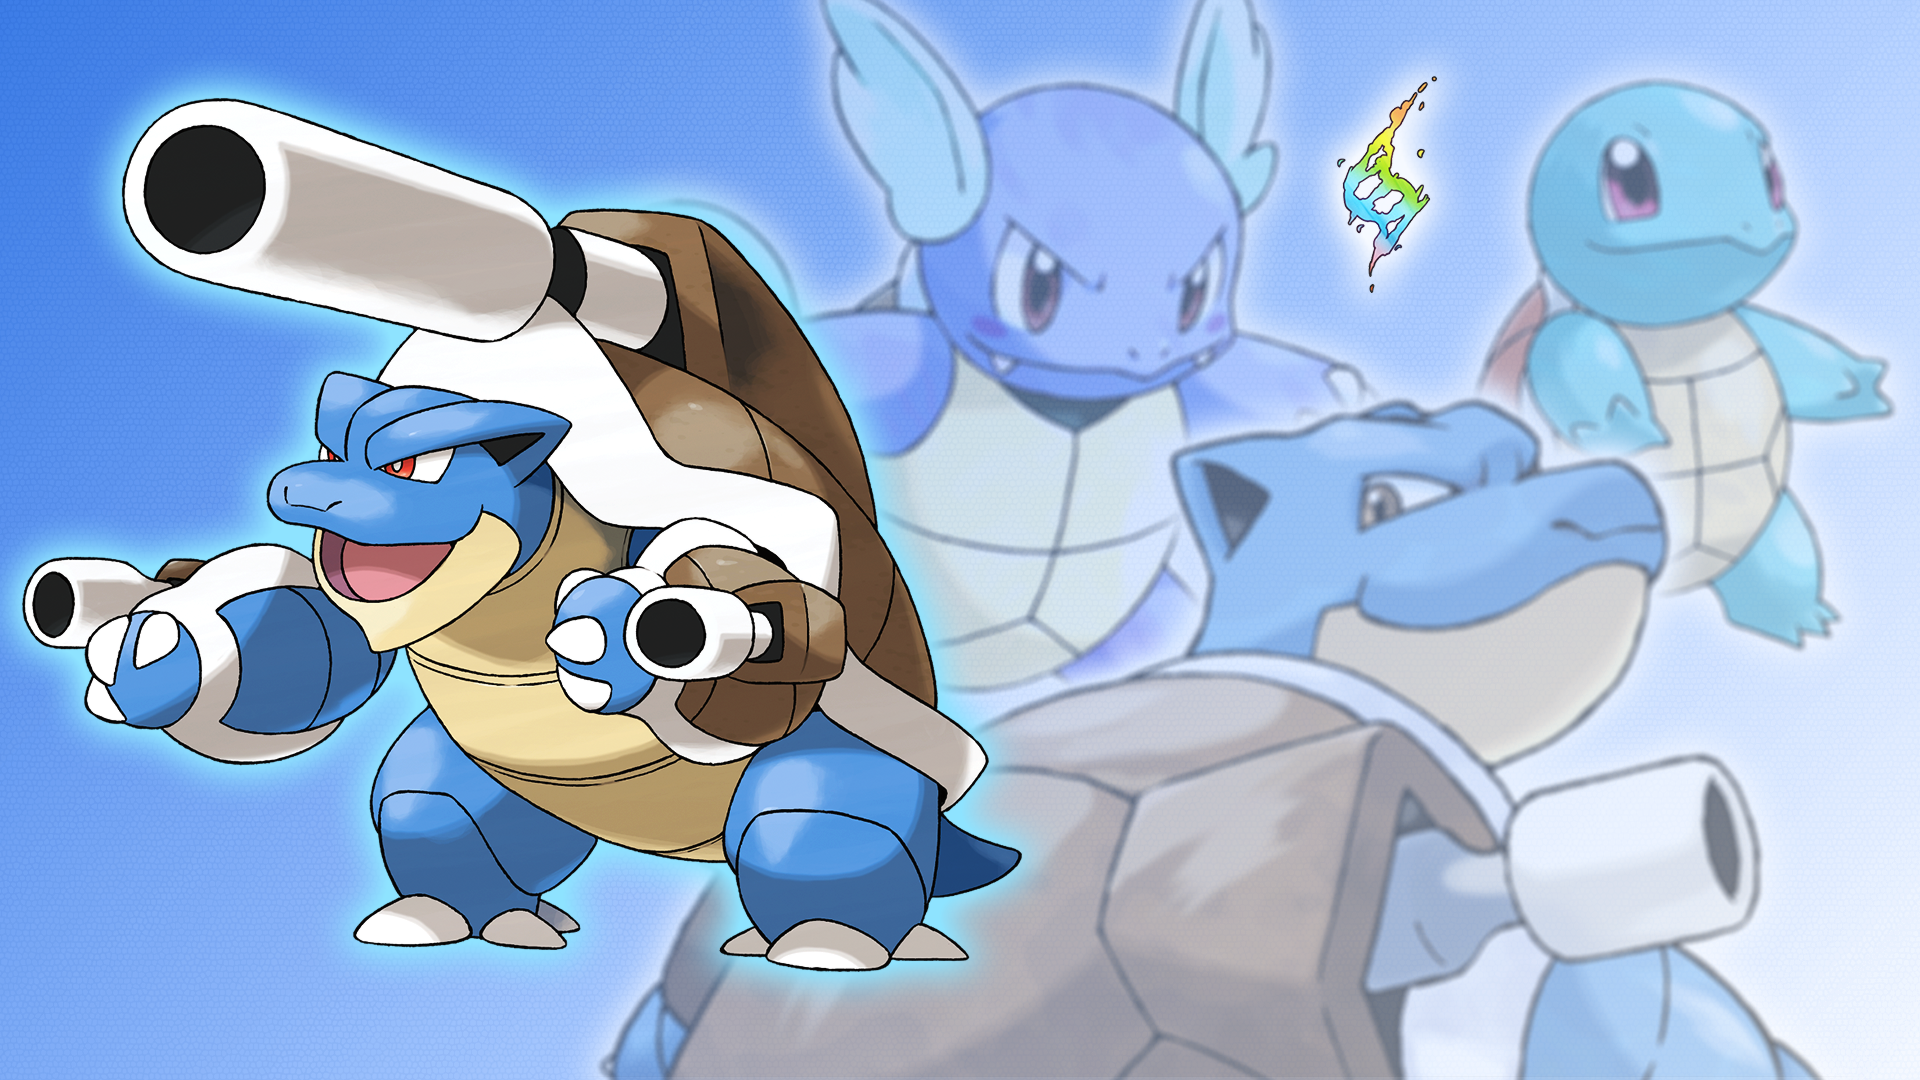 Squirtle Wartortle Blastoise And Mega Wallpaper By Glench On